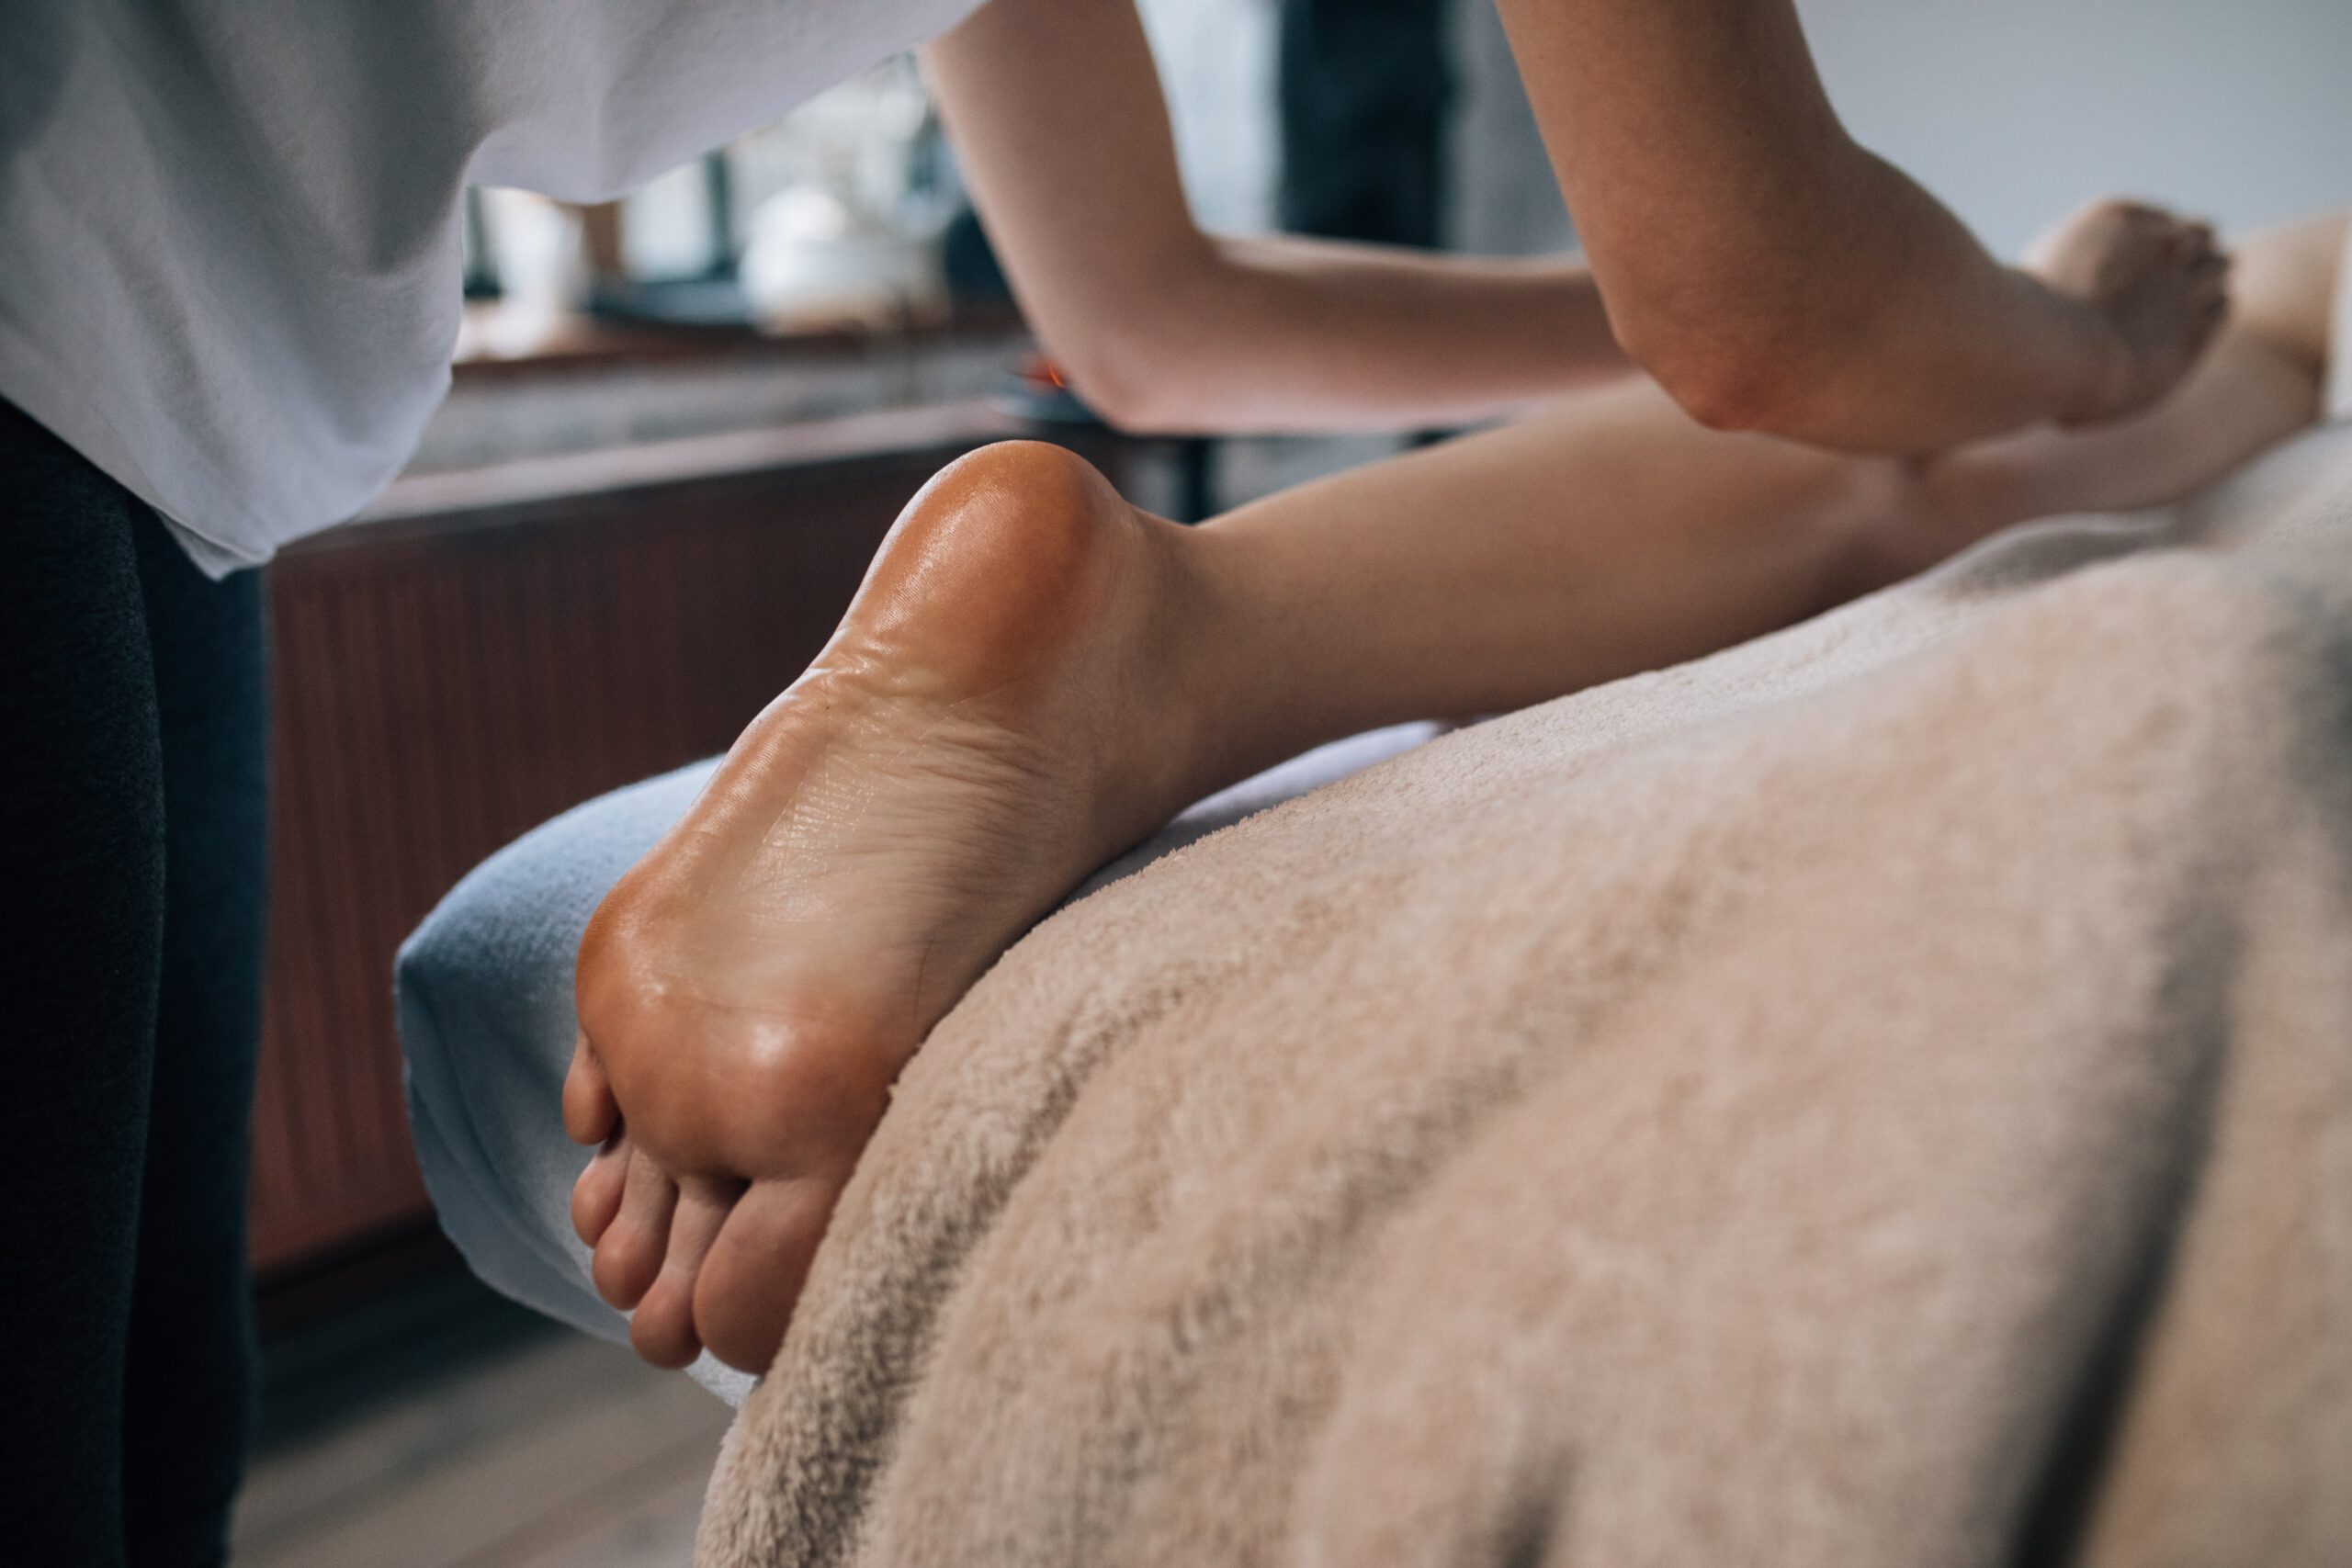 what can a massage therapist tell about you?